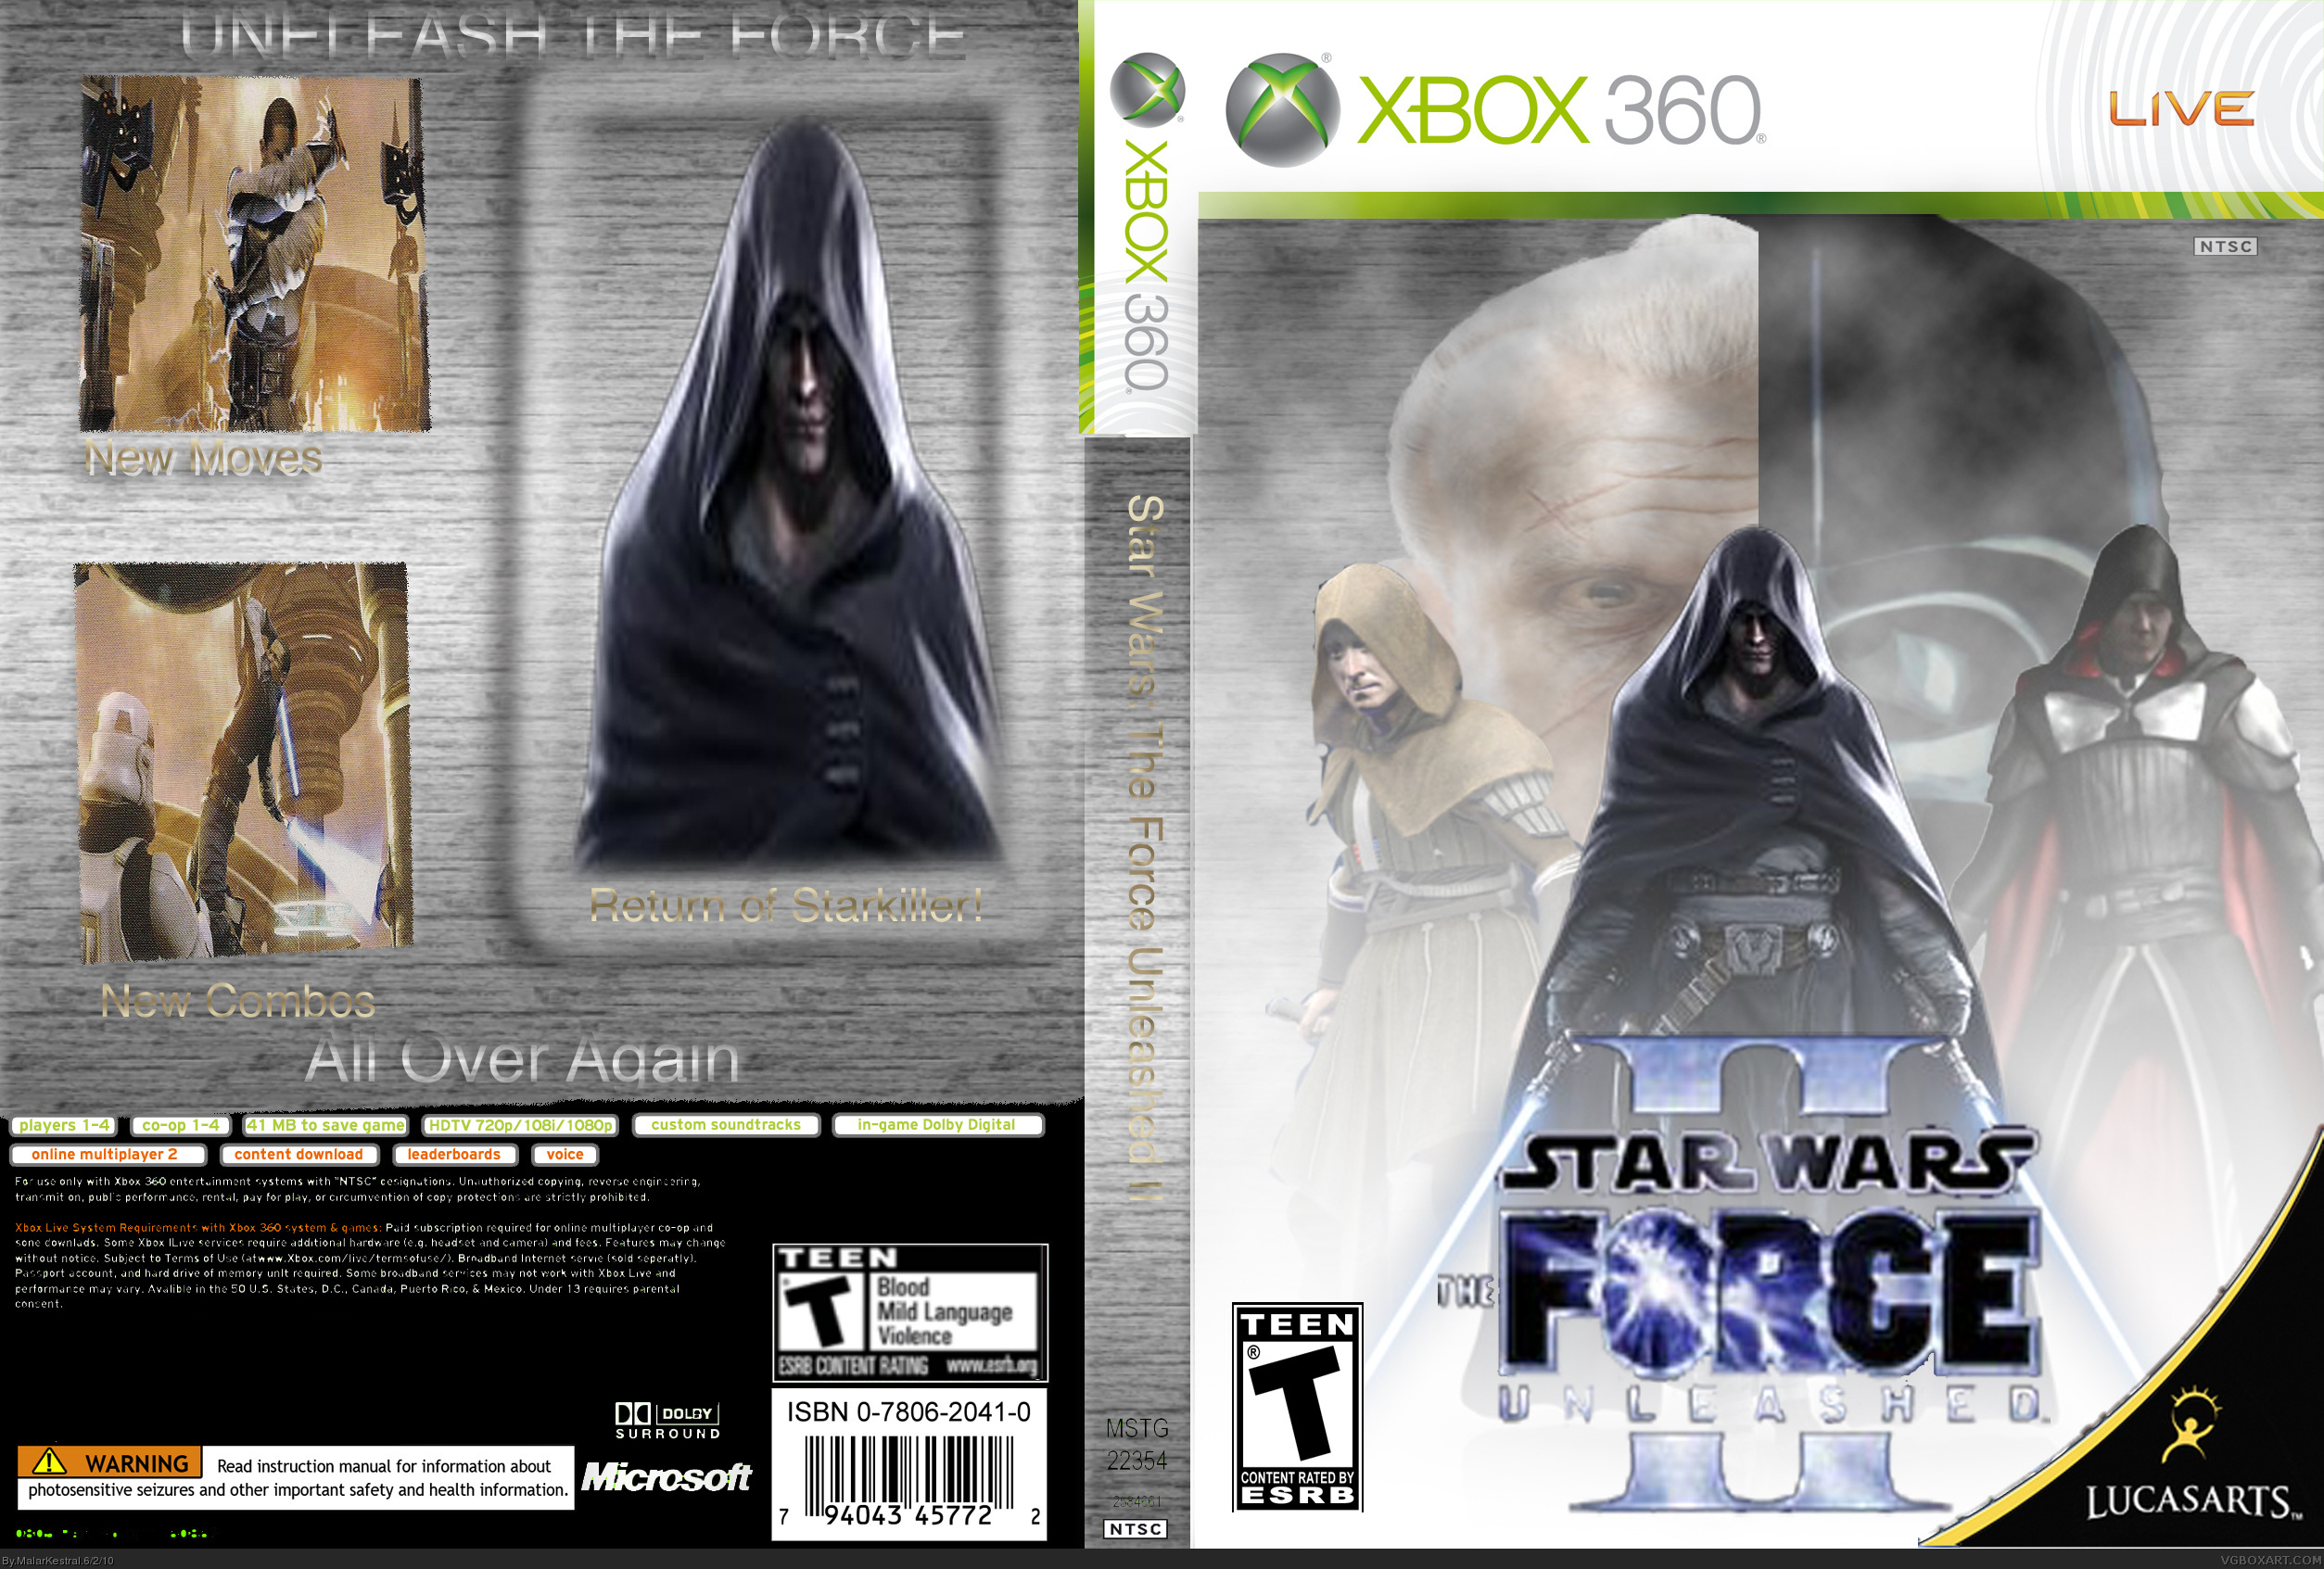 Star Wars the Force unleashed 2 Xbox 360 обложка. Star Wars the Force unleashed Xbox 360 обложка. Коды на Star Wars the Force unleashed 1. MX unleashed Xbox 360 обложка.